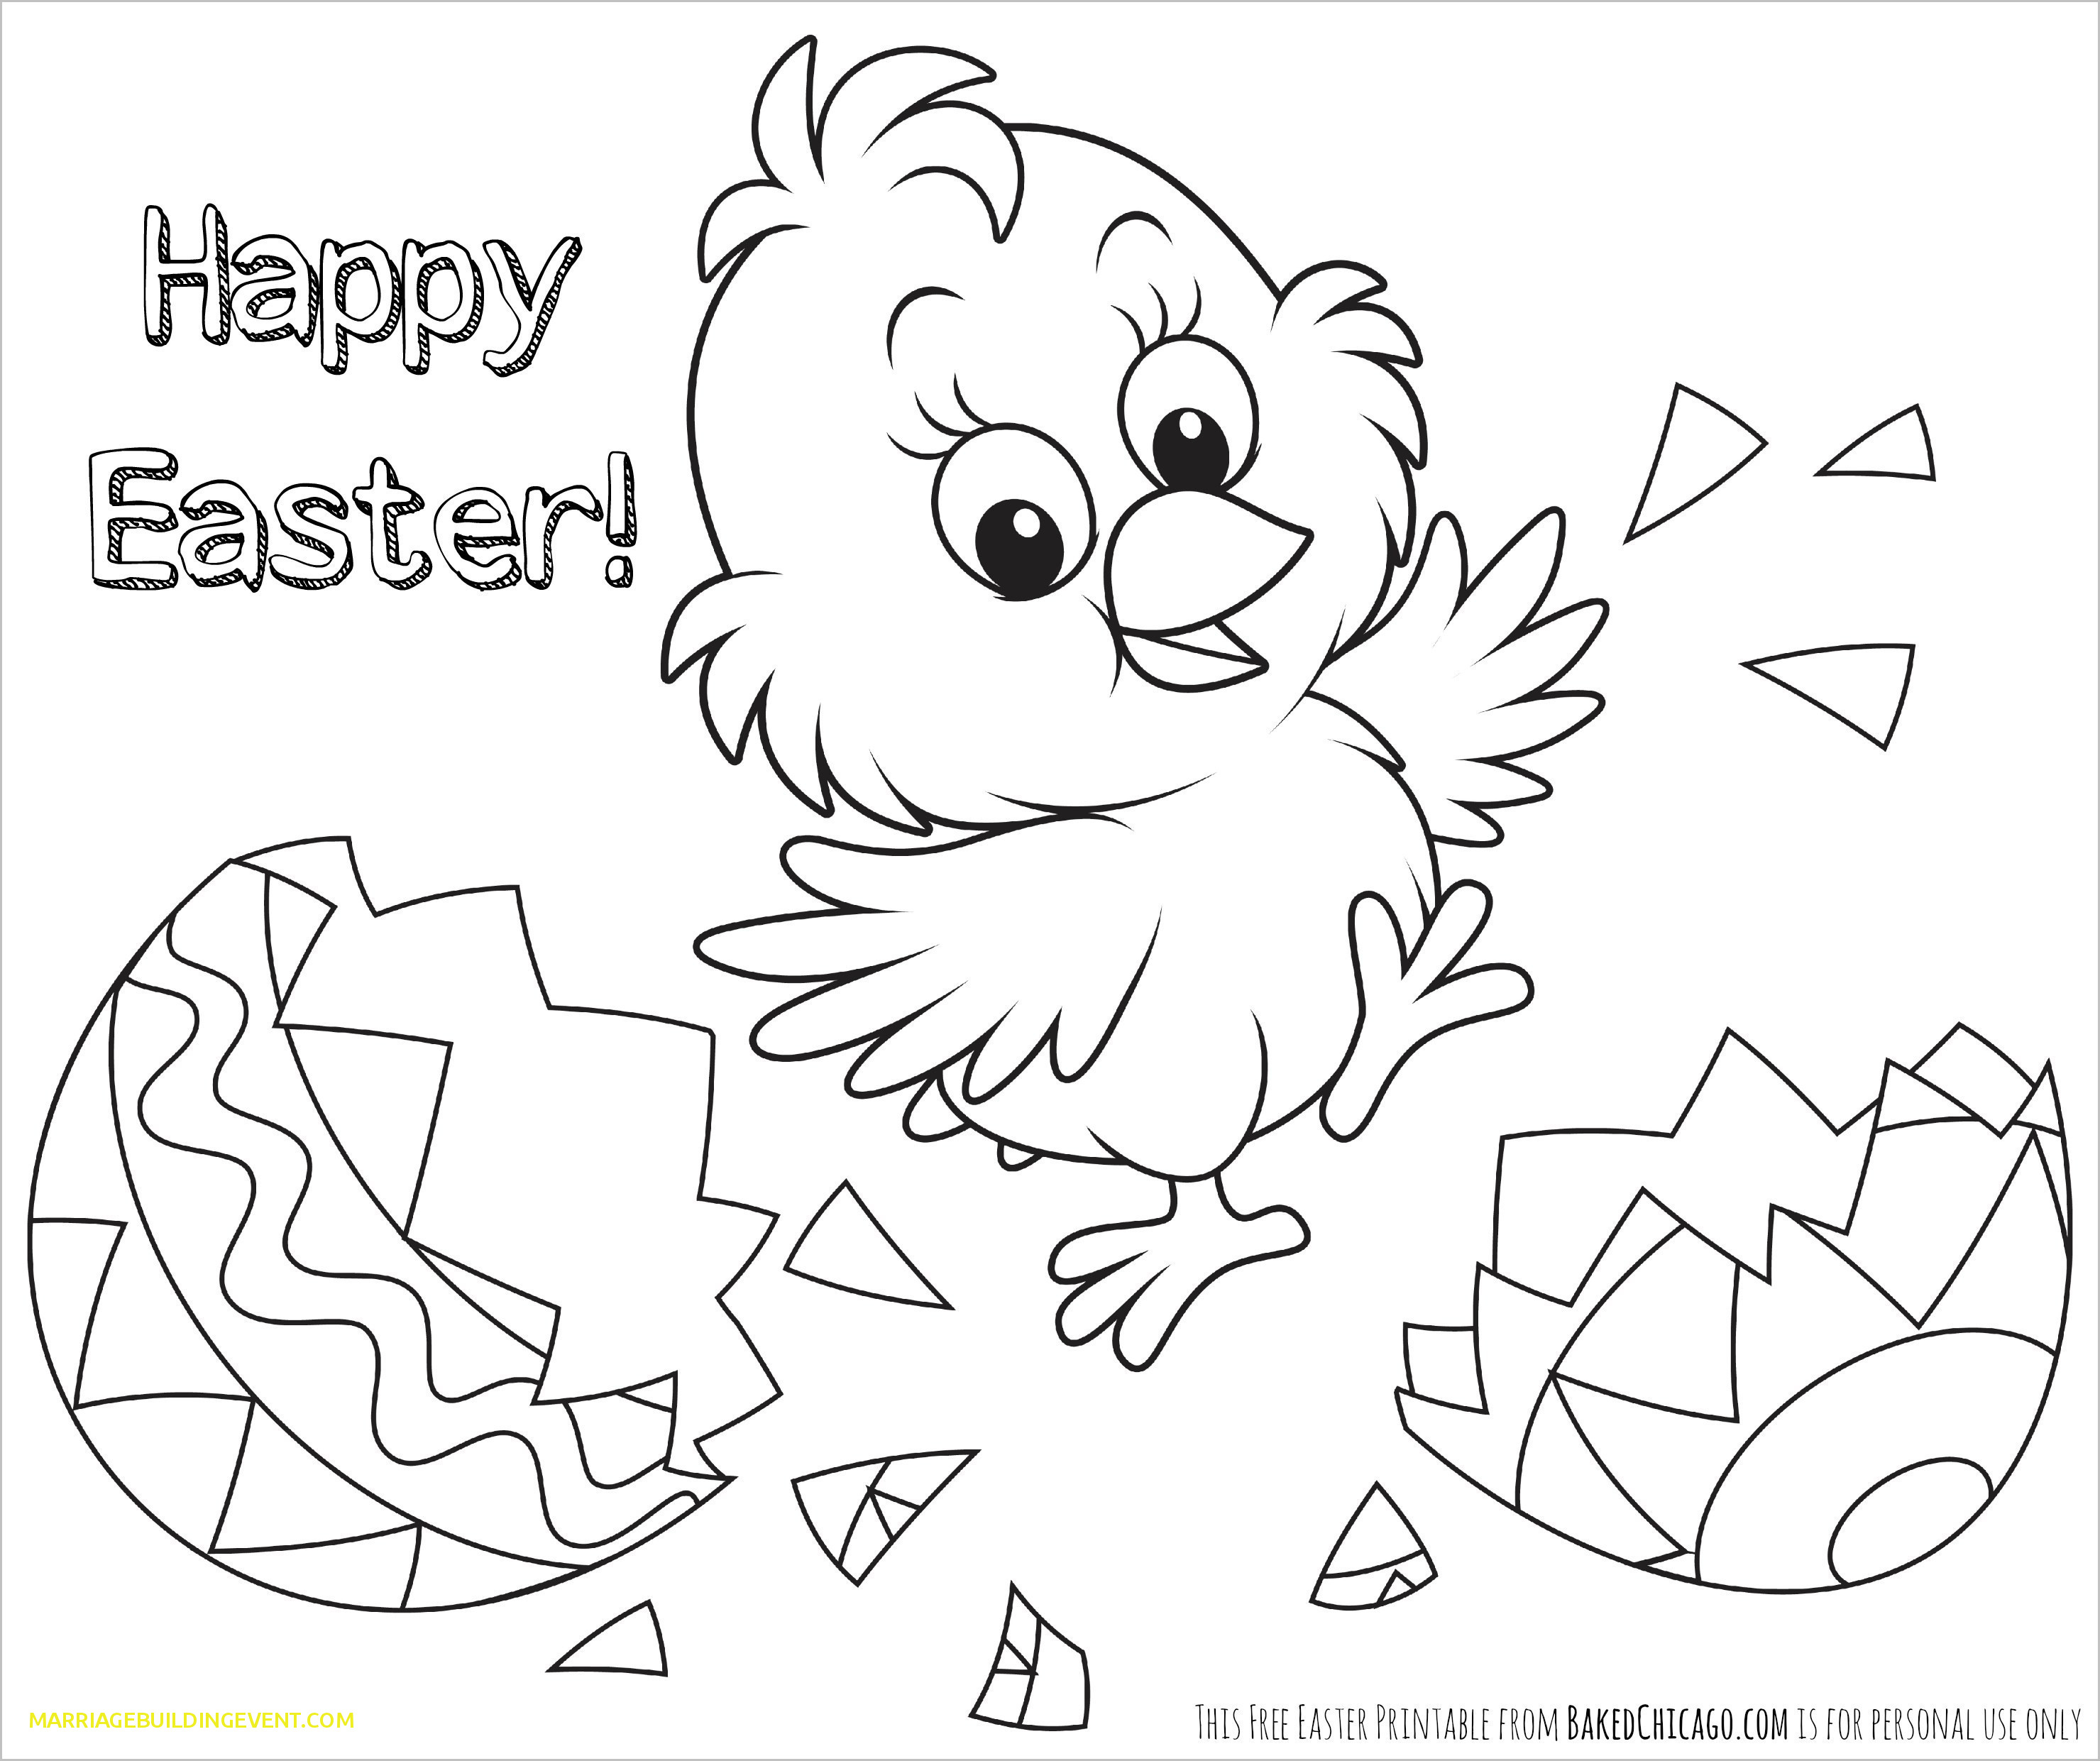 Beau Easter Coloring Pages For Kids To Print | Marriagebuildingevent - Free Printable Easter Colouring Sheets